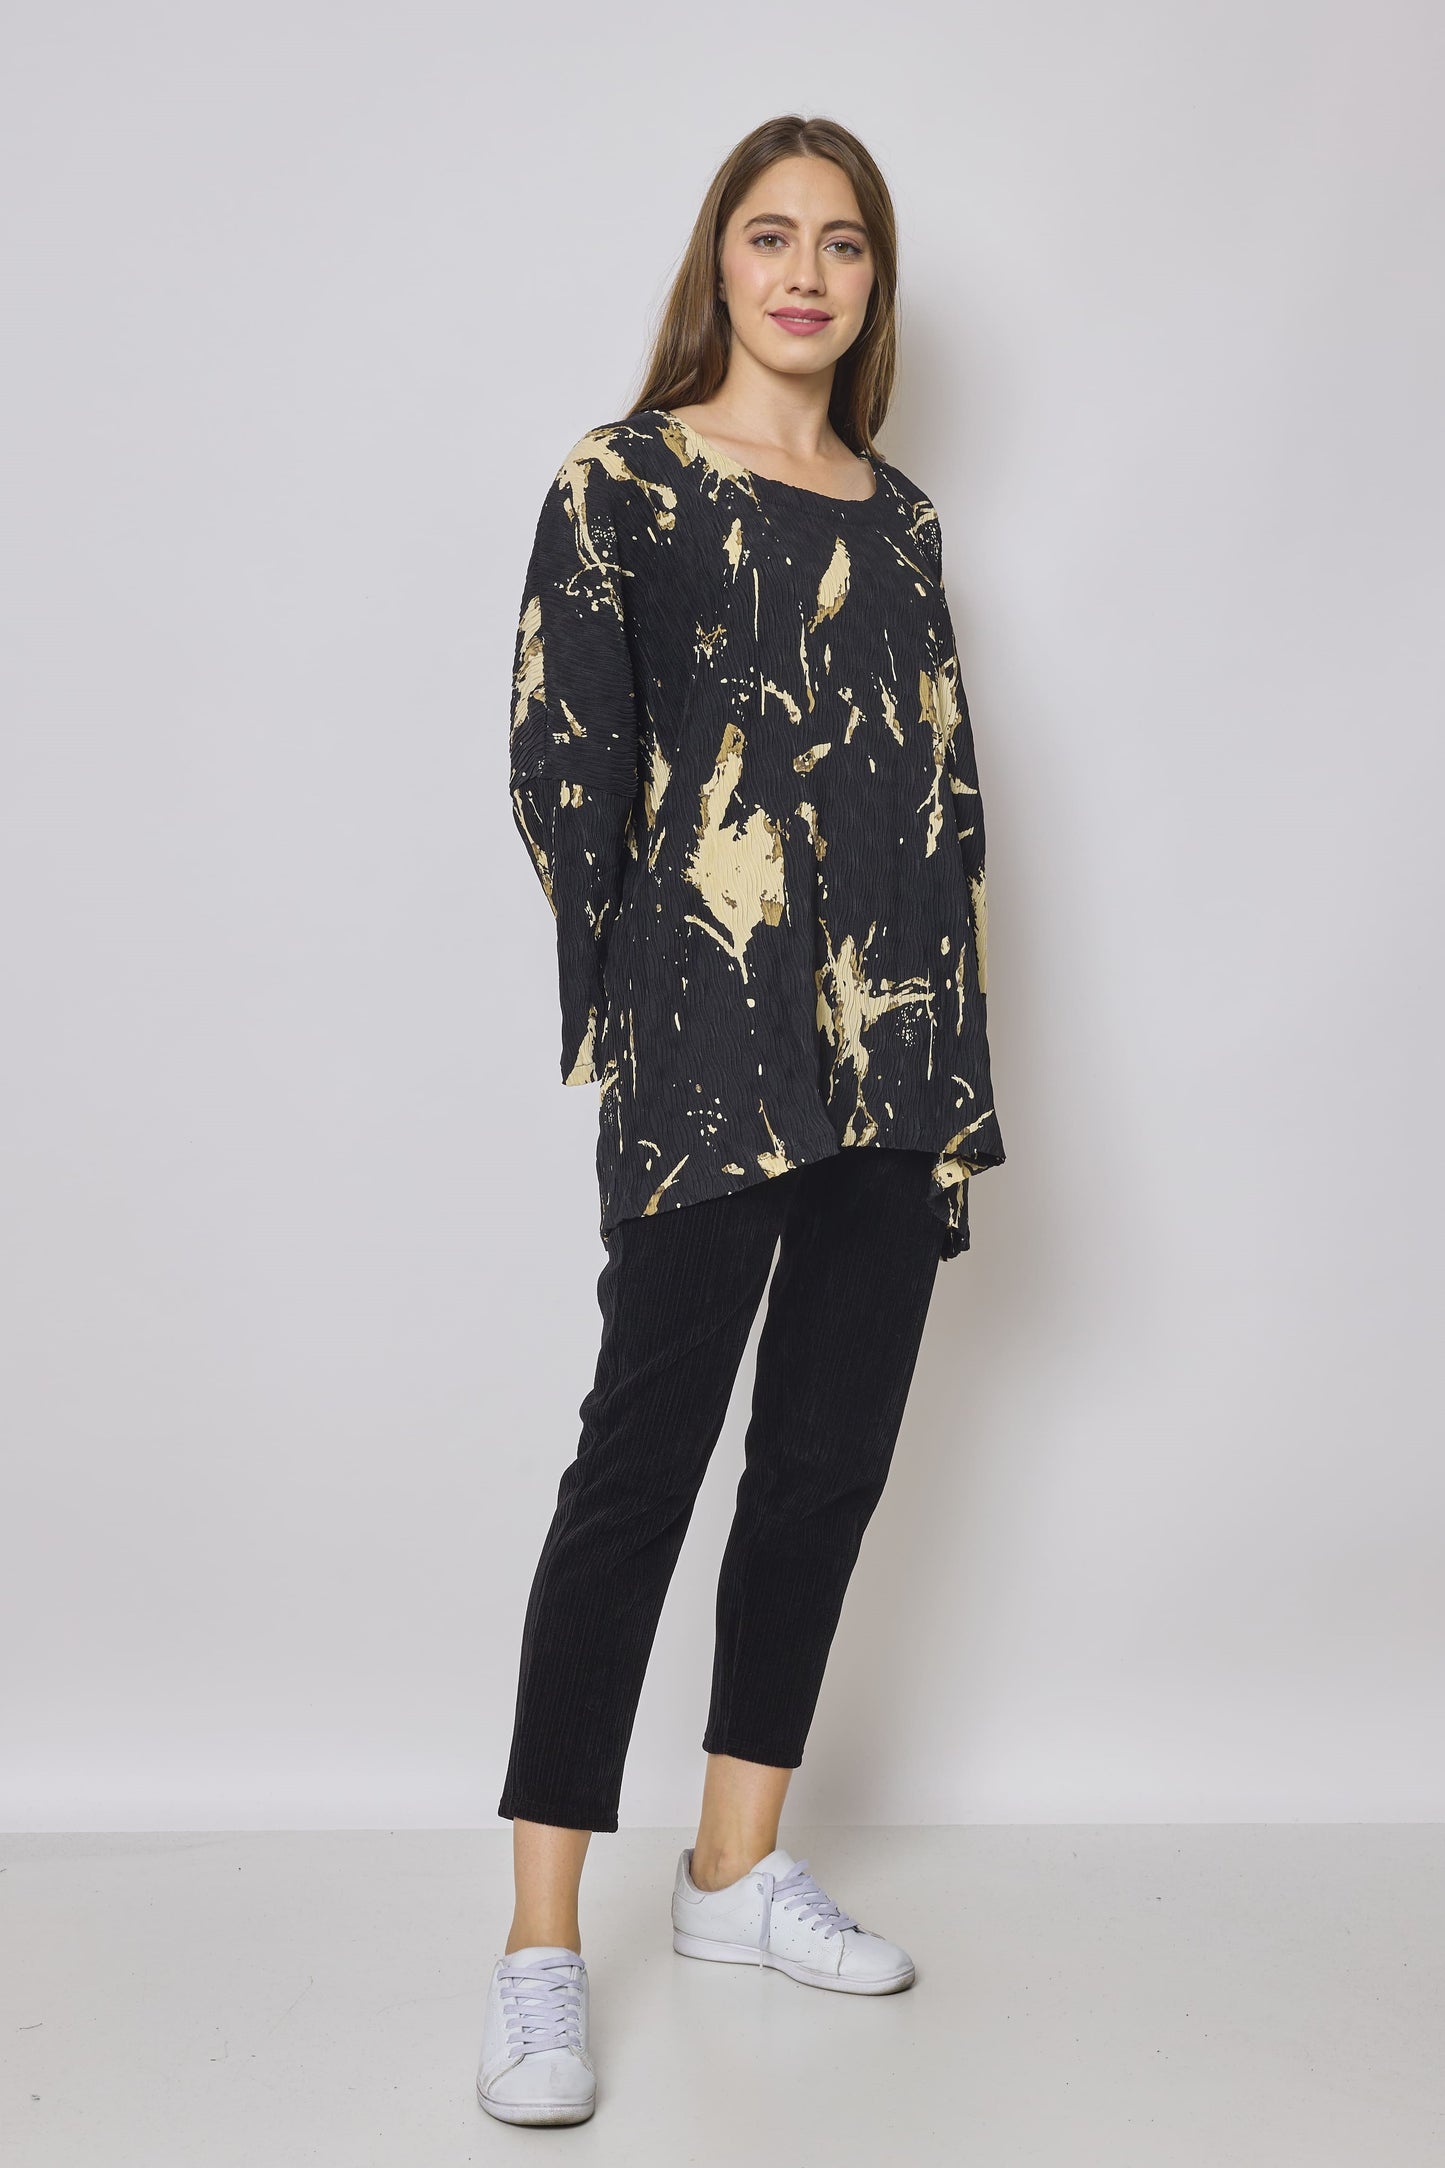 Chic and original women's blouse